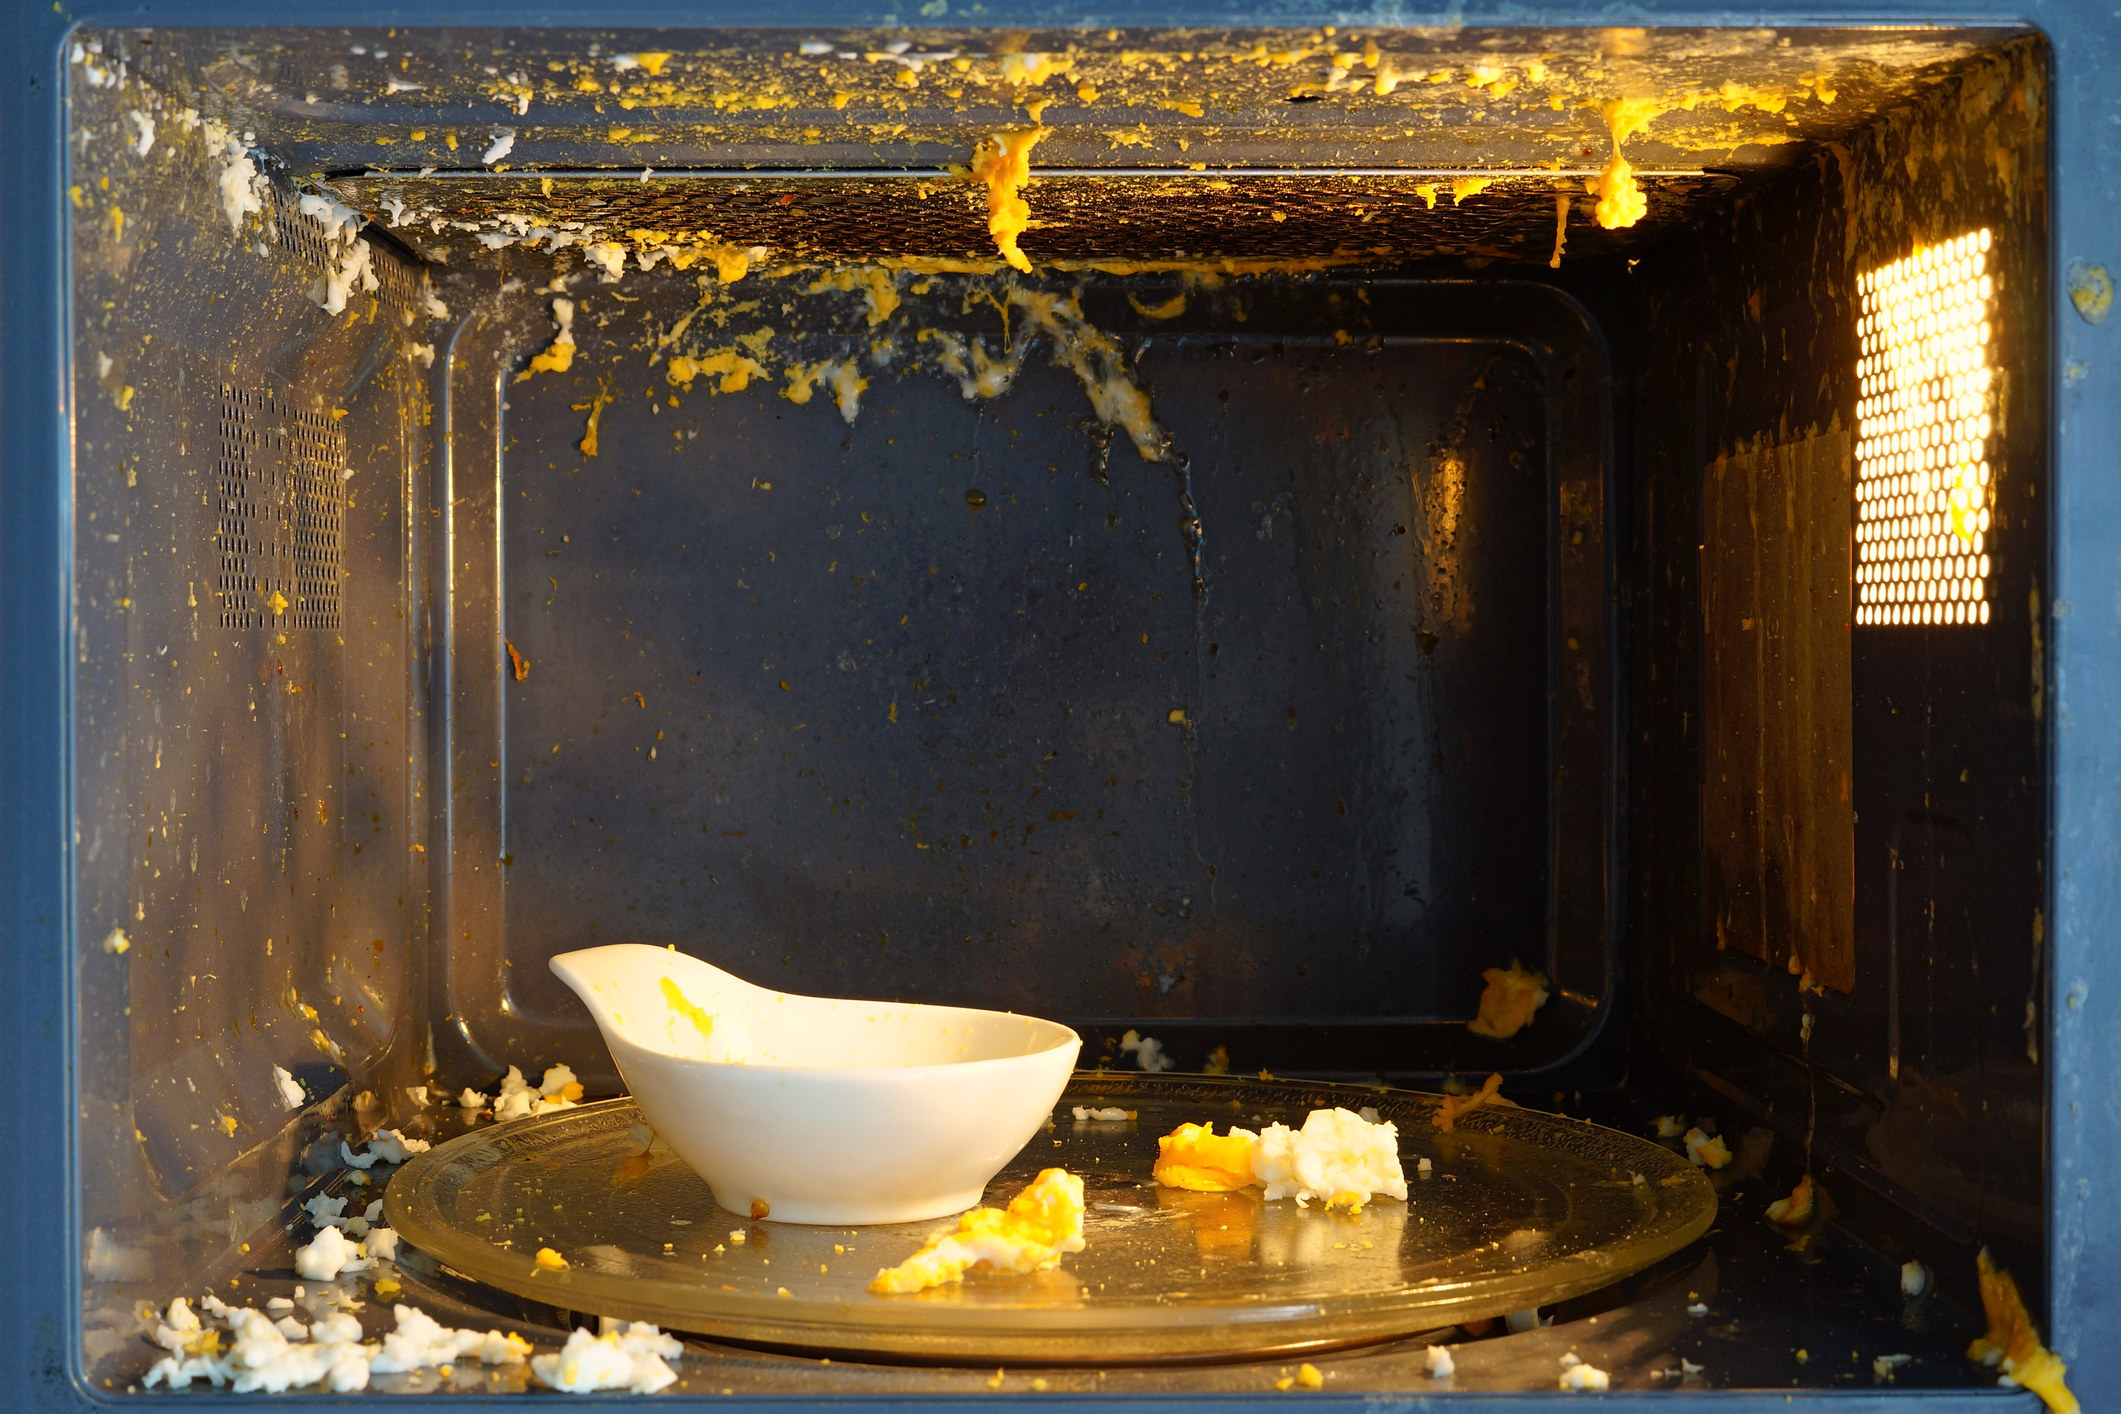 An exploded egg in a microwave